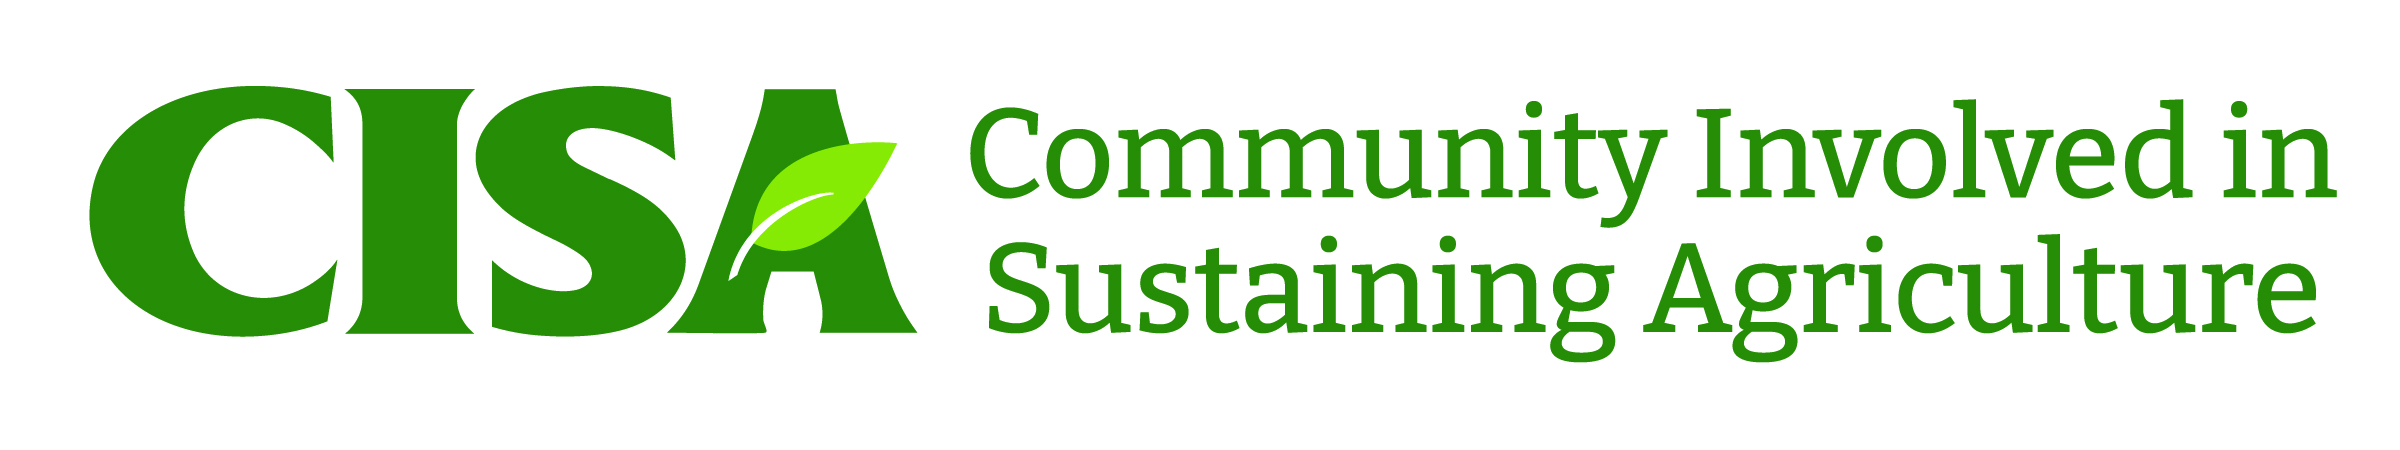 Community Involved in Sustaining Agriculture, Inc